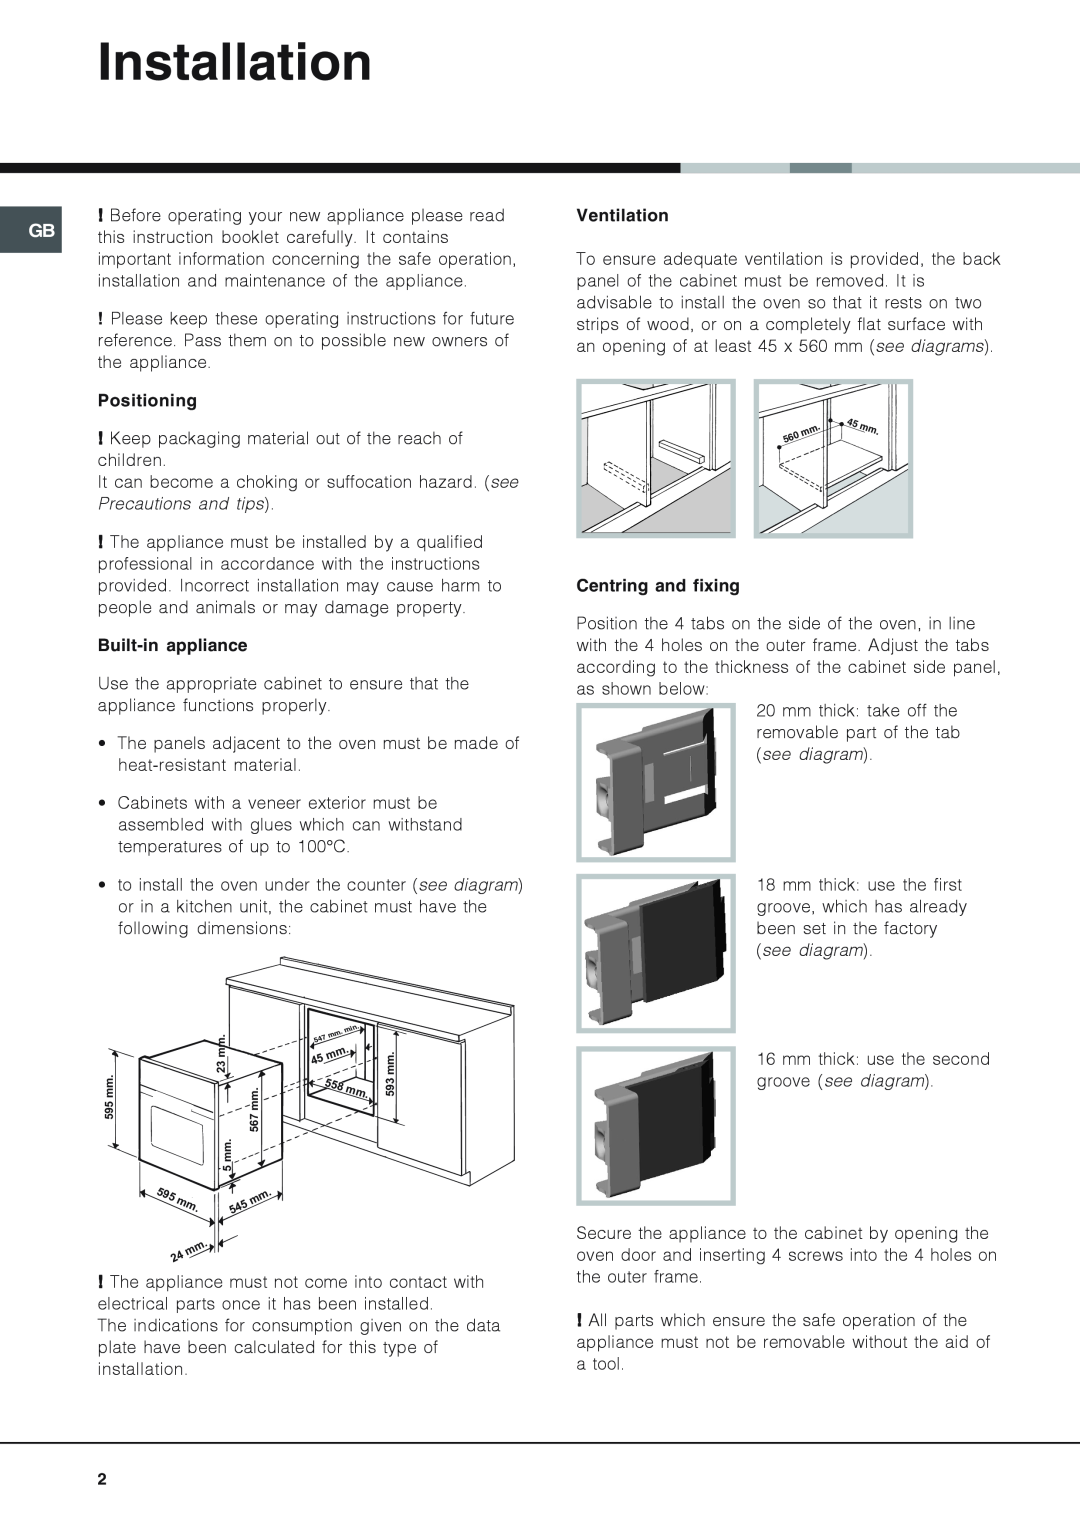 Xerox SE89PG X manual Installation, Positioning, Precautions and tips, Built-inappliance, Ventilation, Centring and fixing 